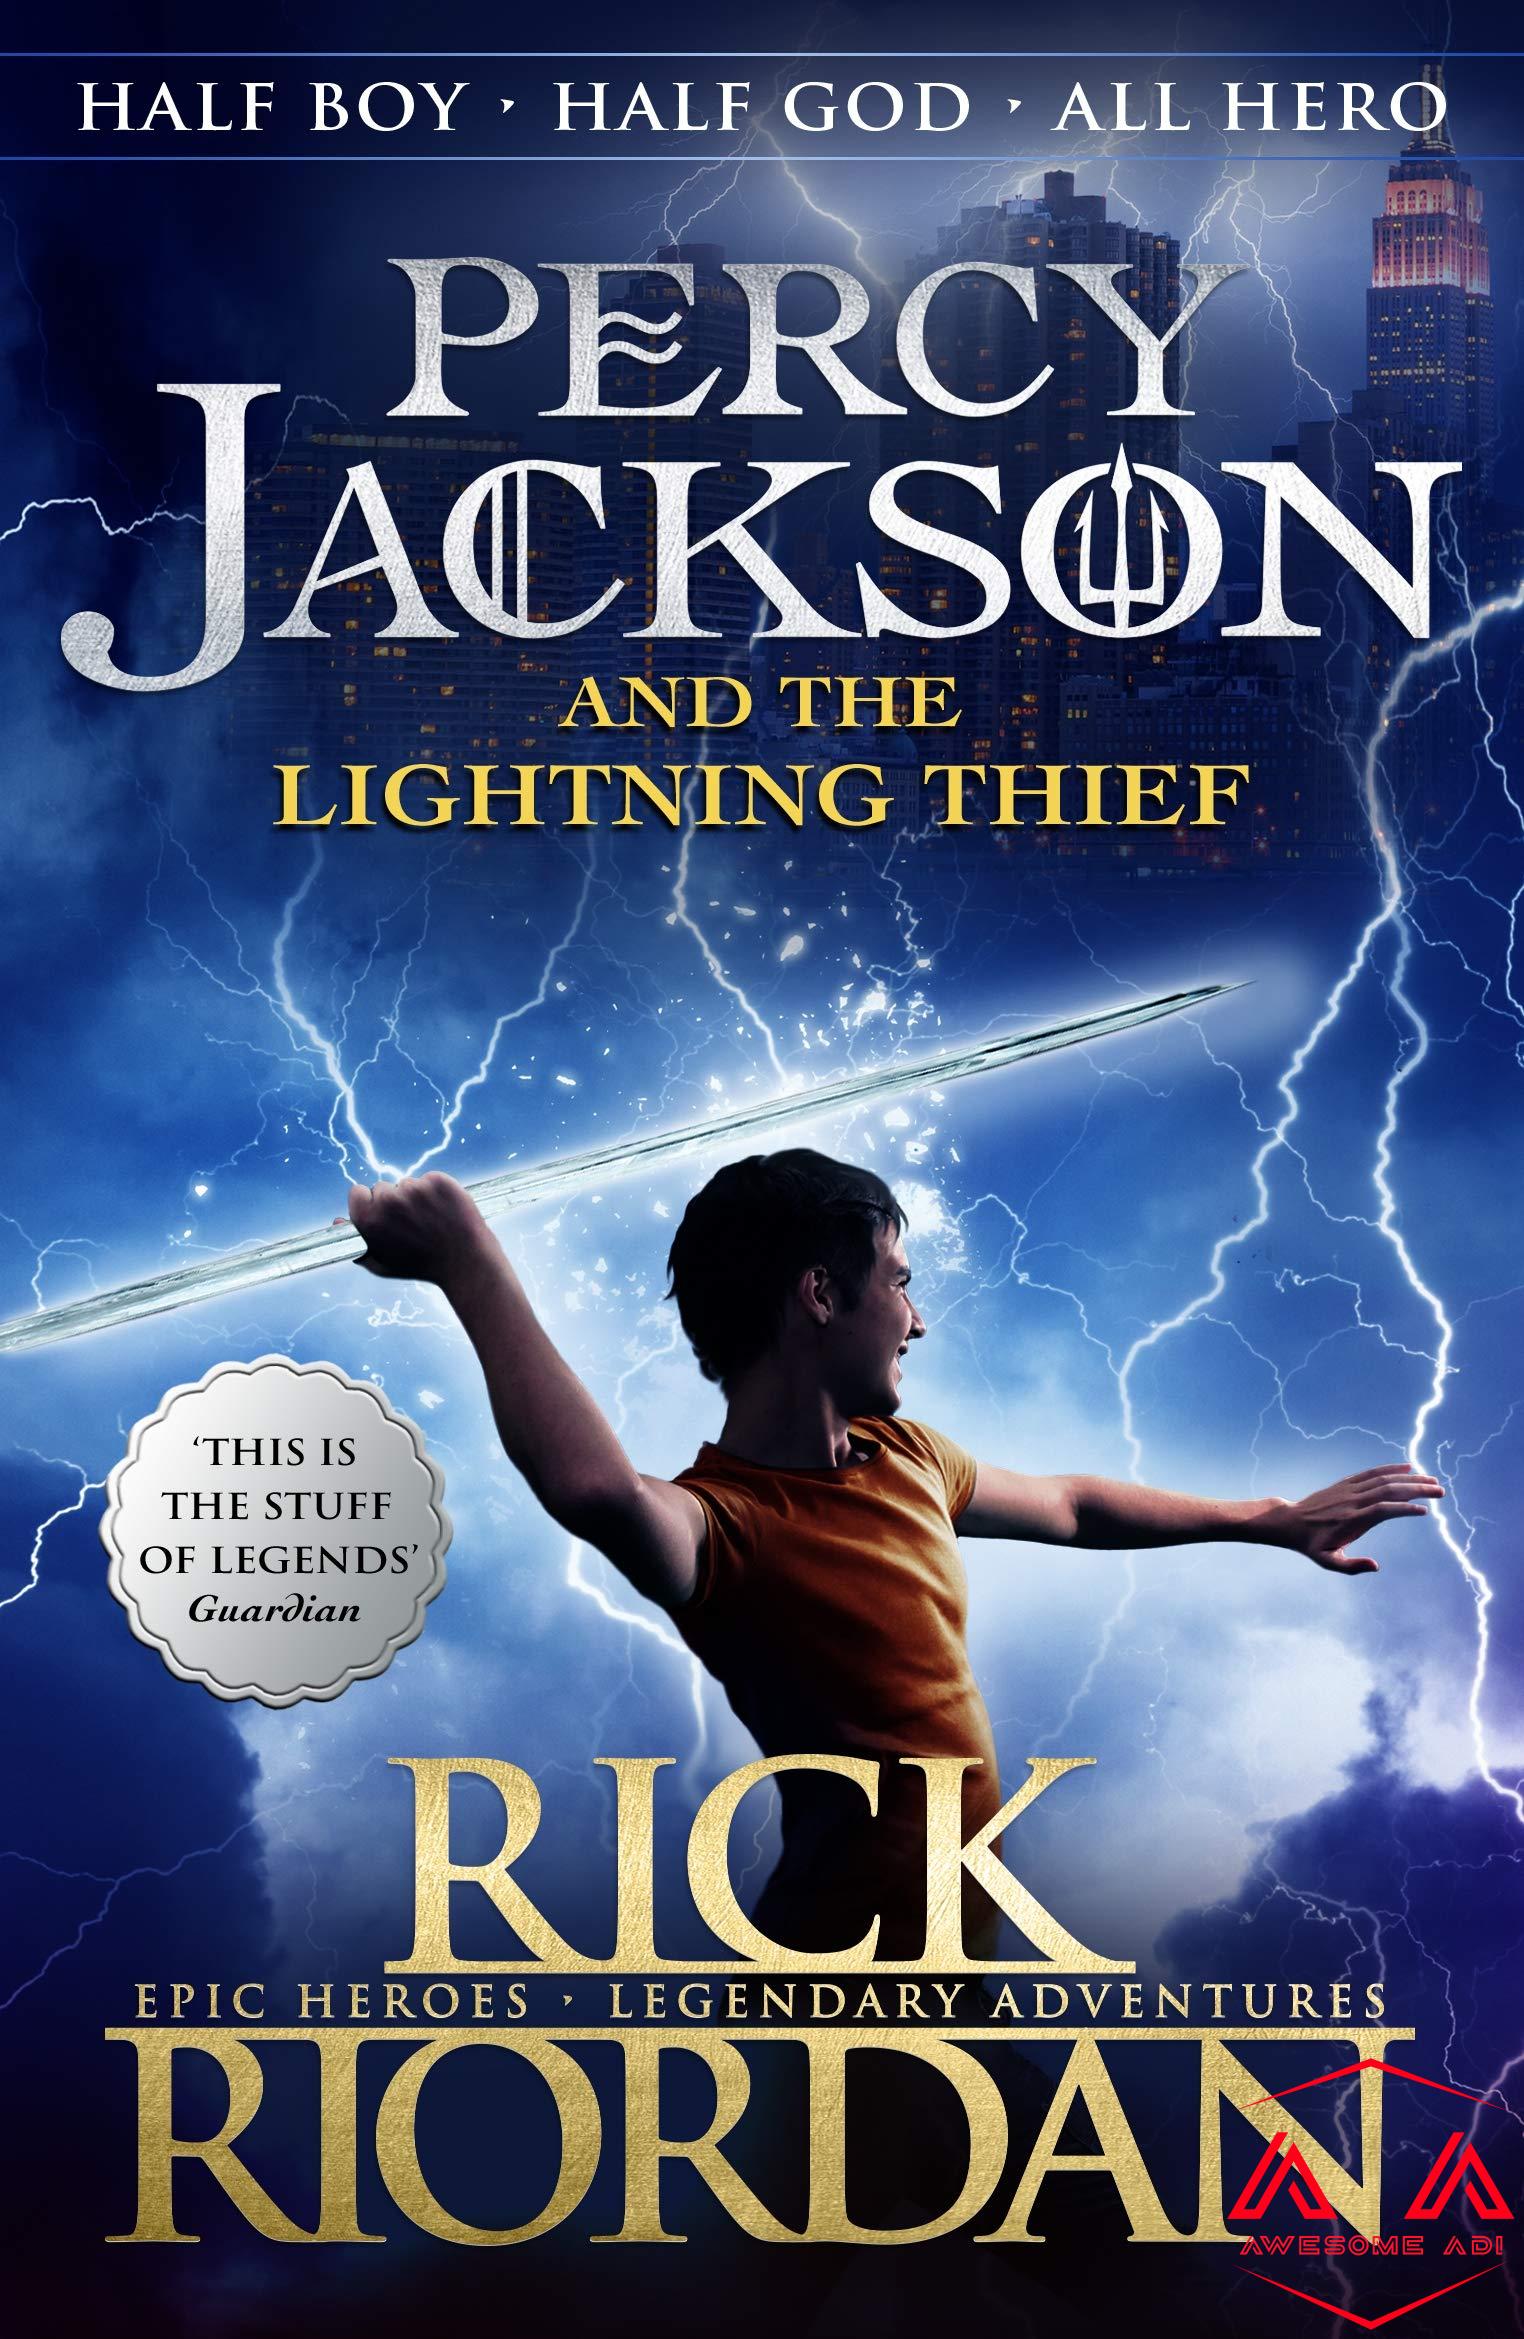 book review of percy jackson and the lightning thief